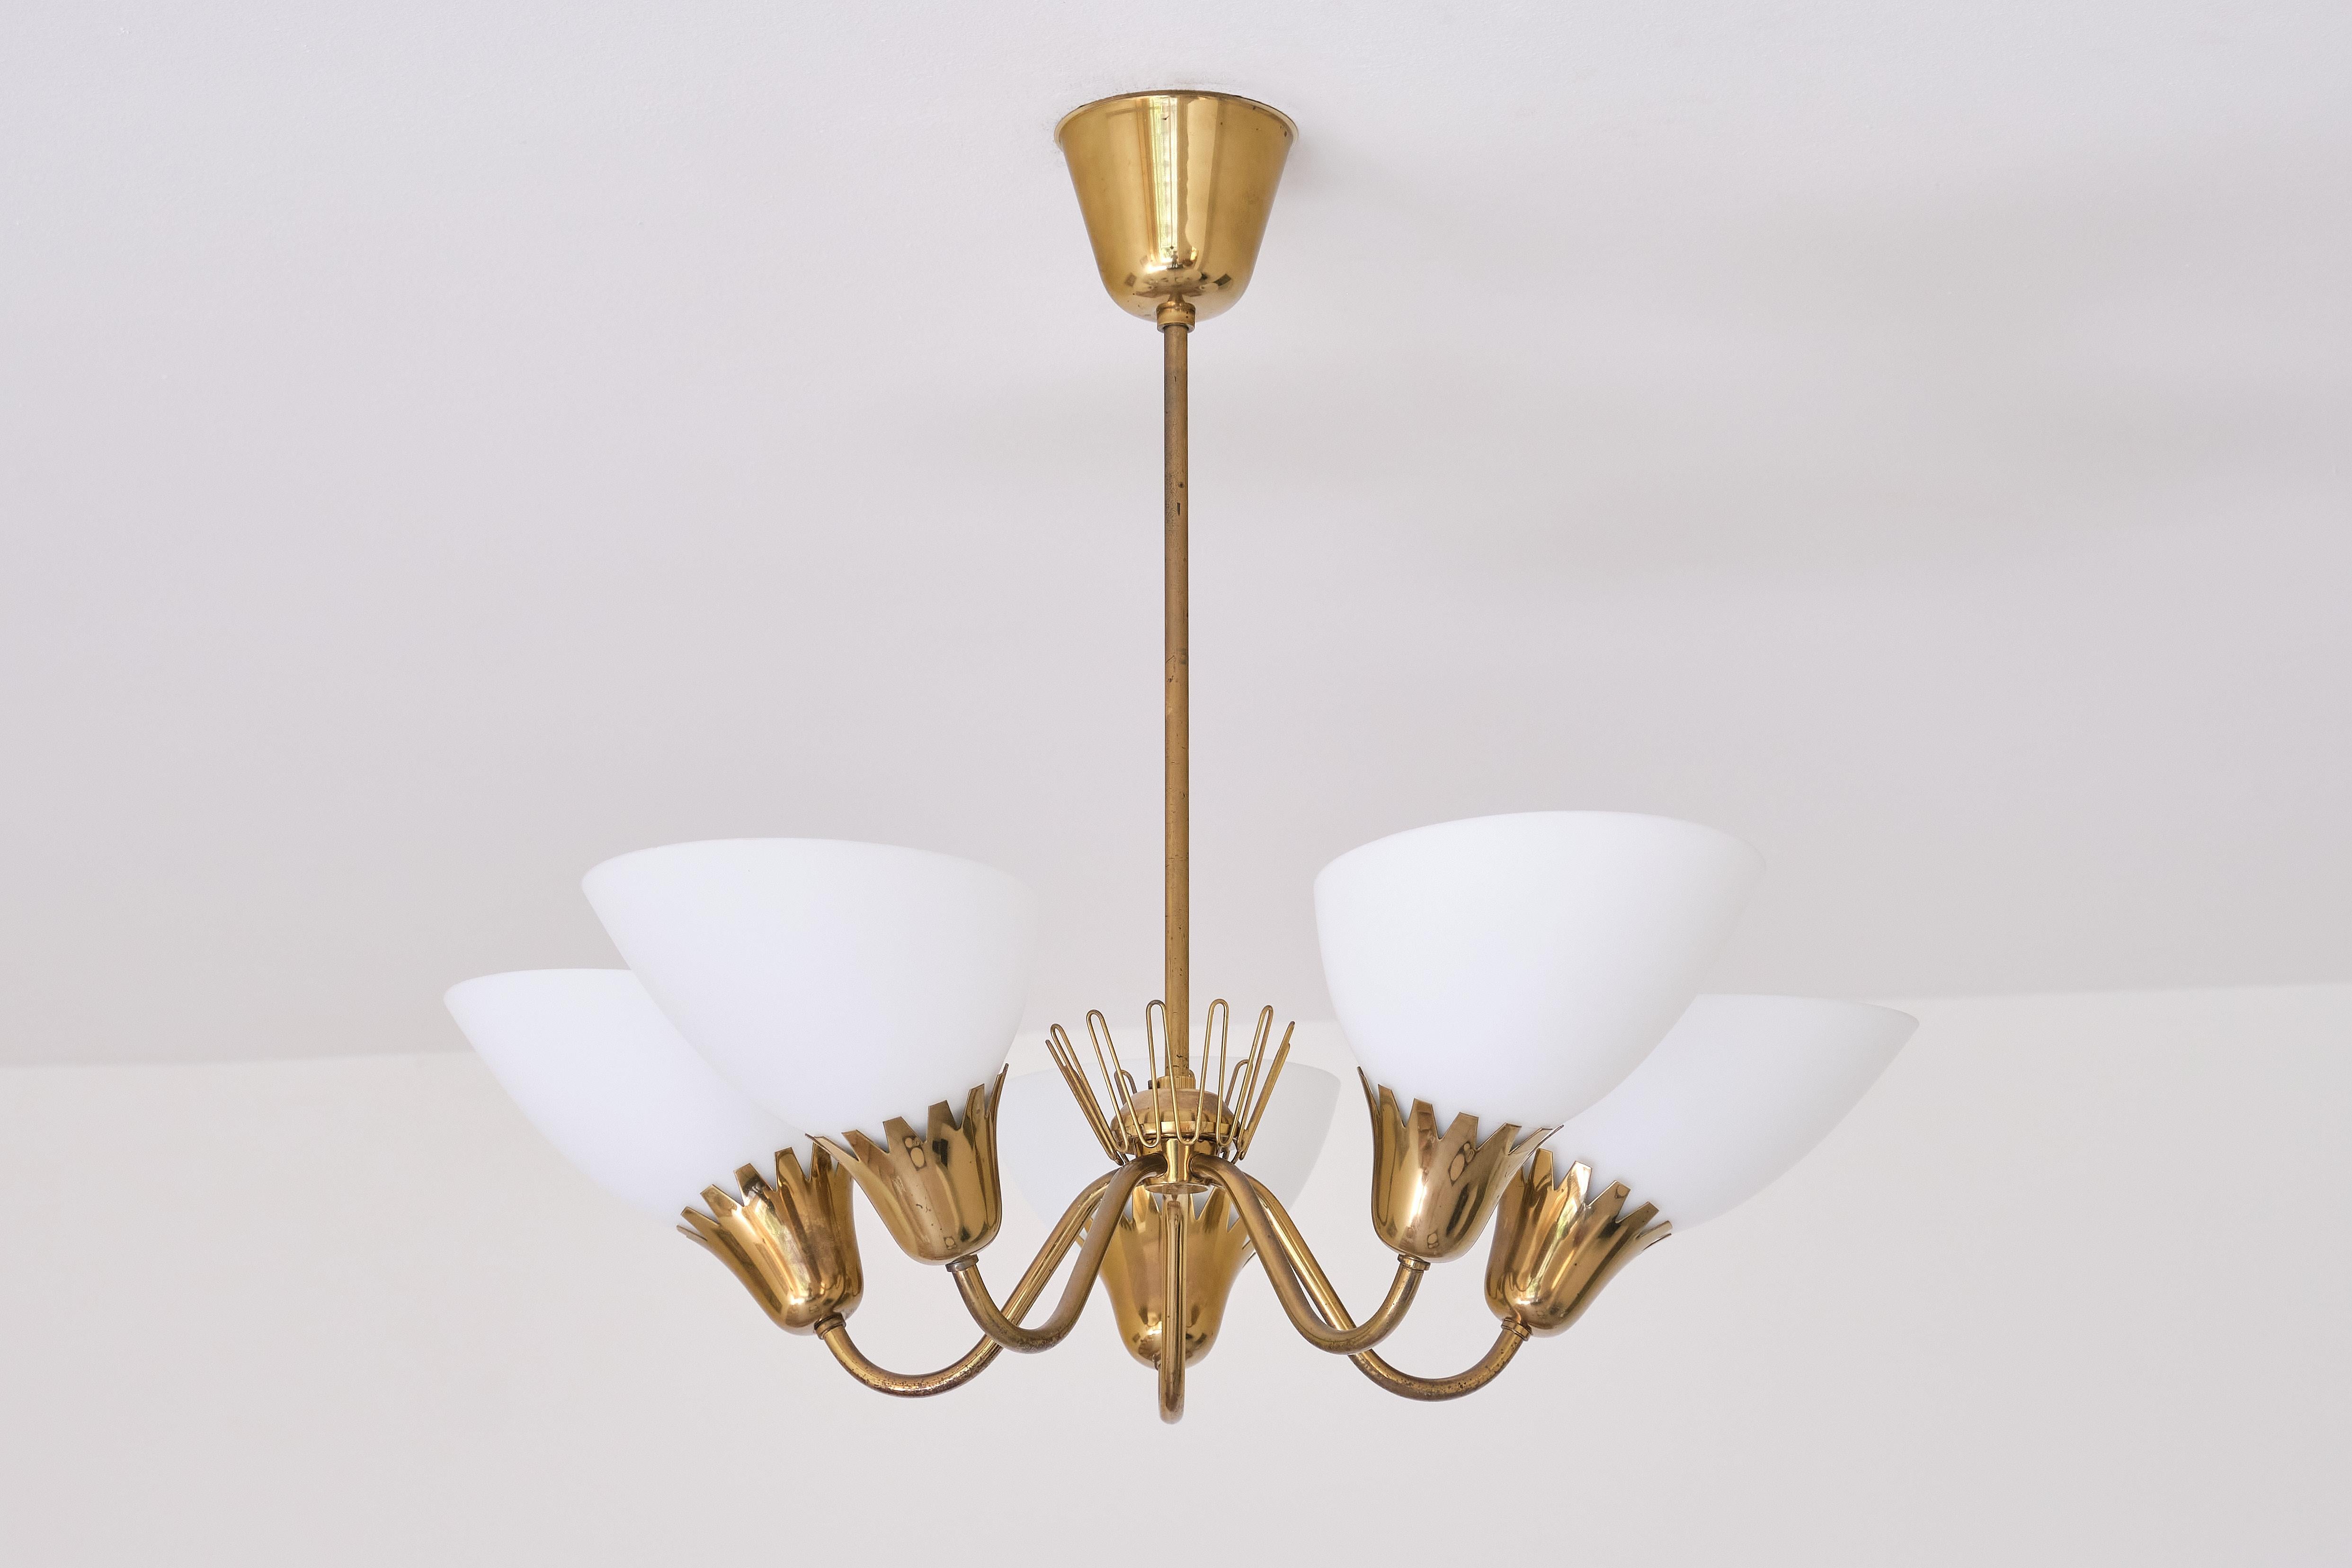 This rare five arm chandelier was produced by ASEA in Sweden in the early 1950s. The lamp consists of a brass stem, five arms and fittings with matte opaline glass shades. The zigzag edges of the fittings and the decorative brass crown detail in the